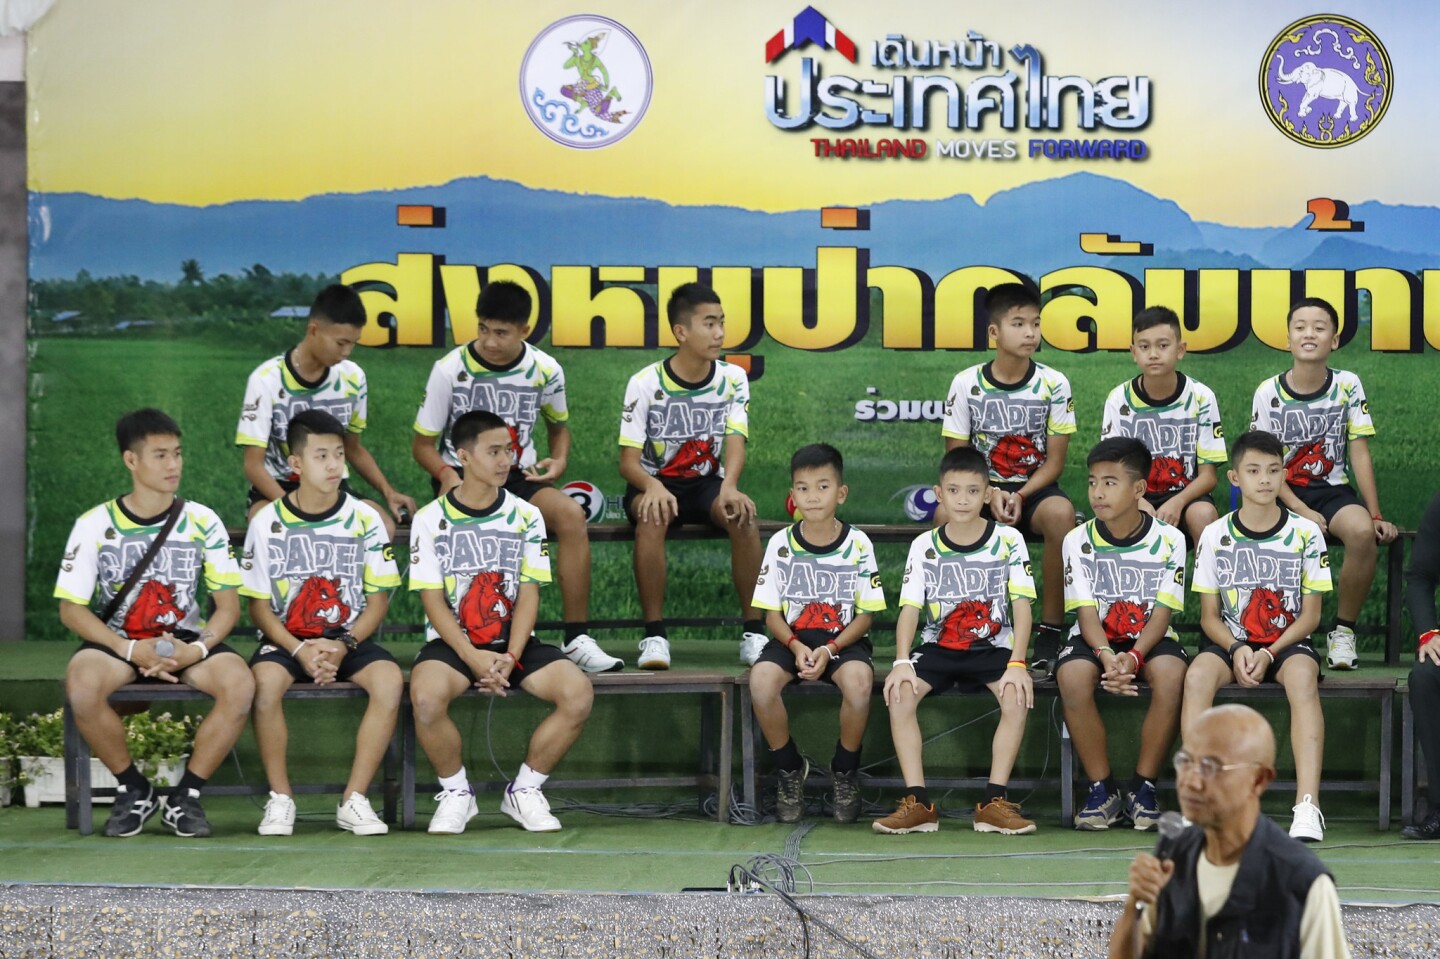 Members of the rescued soccer team and their coach sit during a press conference discussing their ordeal in the cave in Chiang Rai, northern Thailand, Wednesday, July 18, 2018.